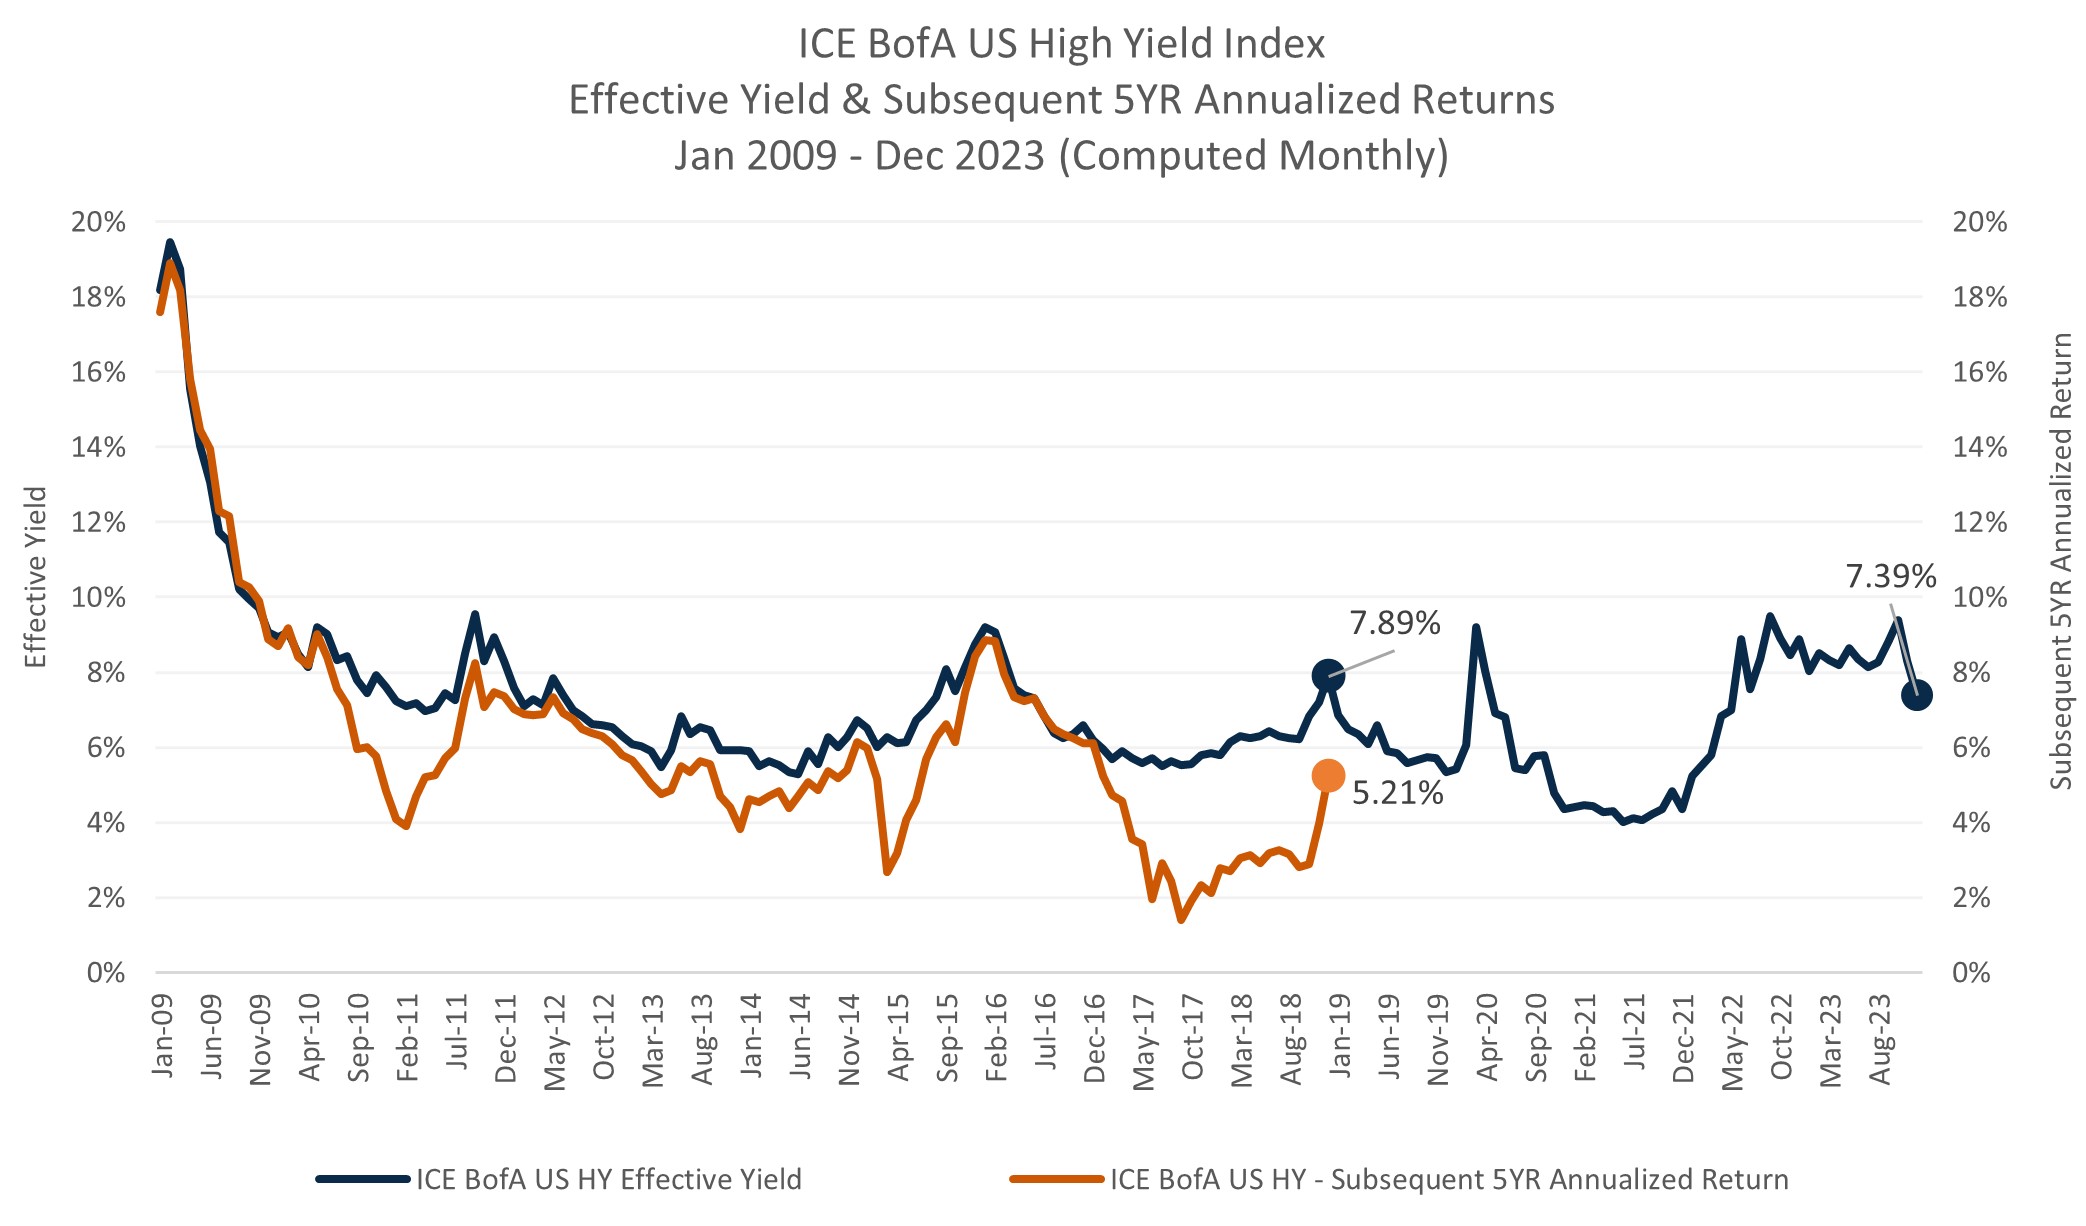 ICE BofA US High Yield Index Effective Yield & Subsequent 5YR Annualized Returns Jan 2009 - Dec 2023 (Computed Monthly)